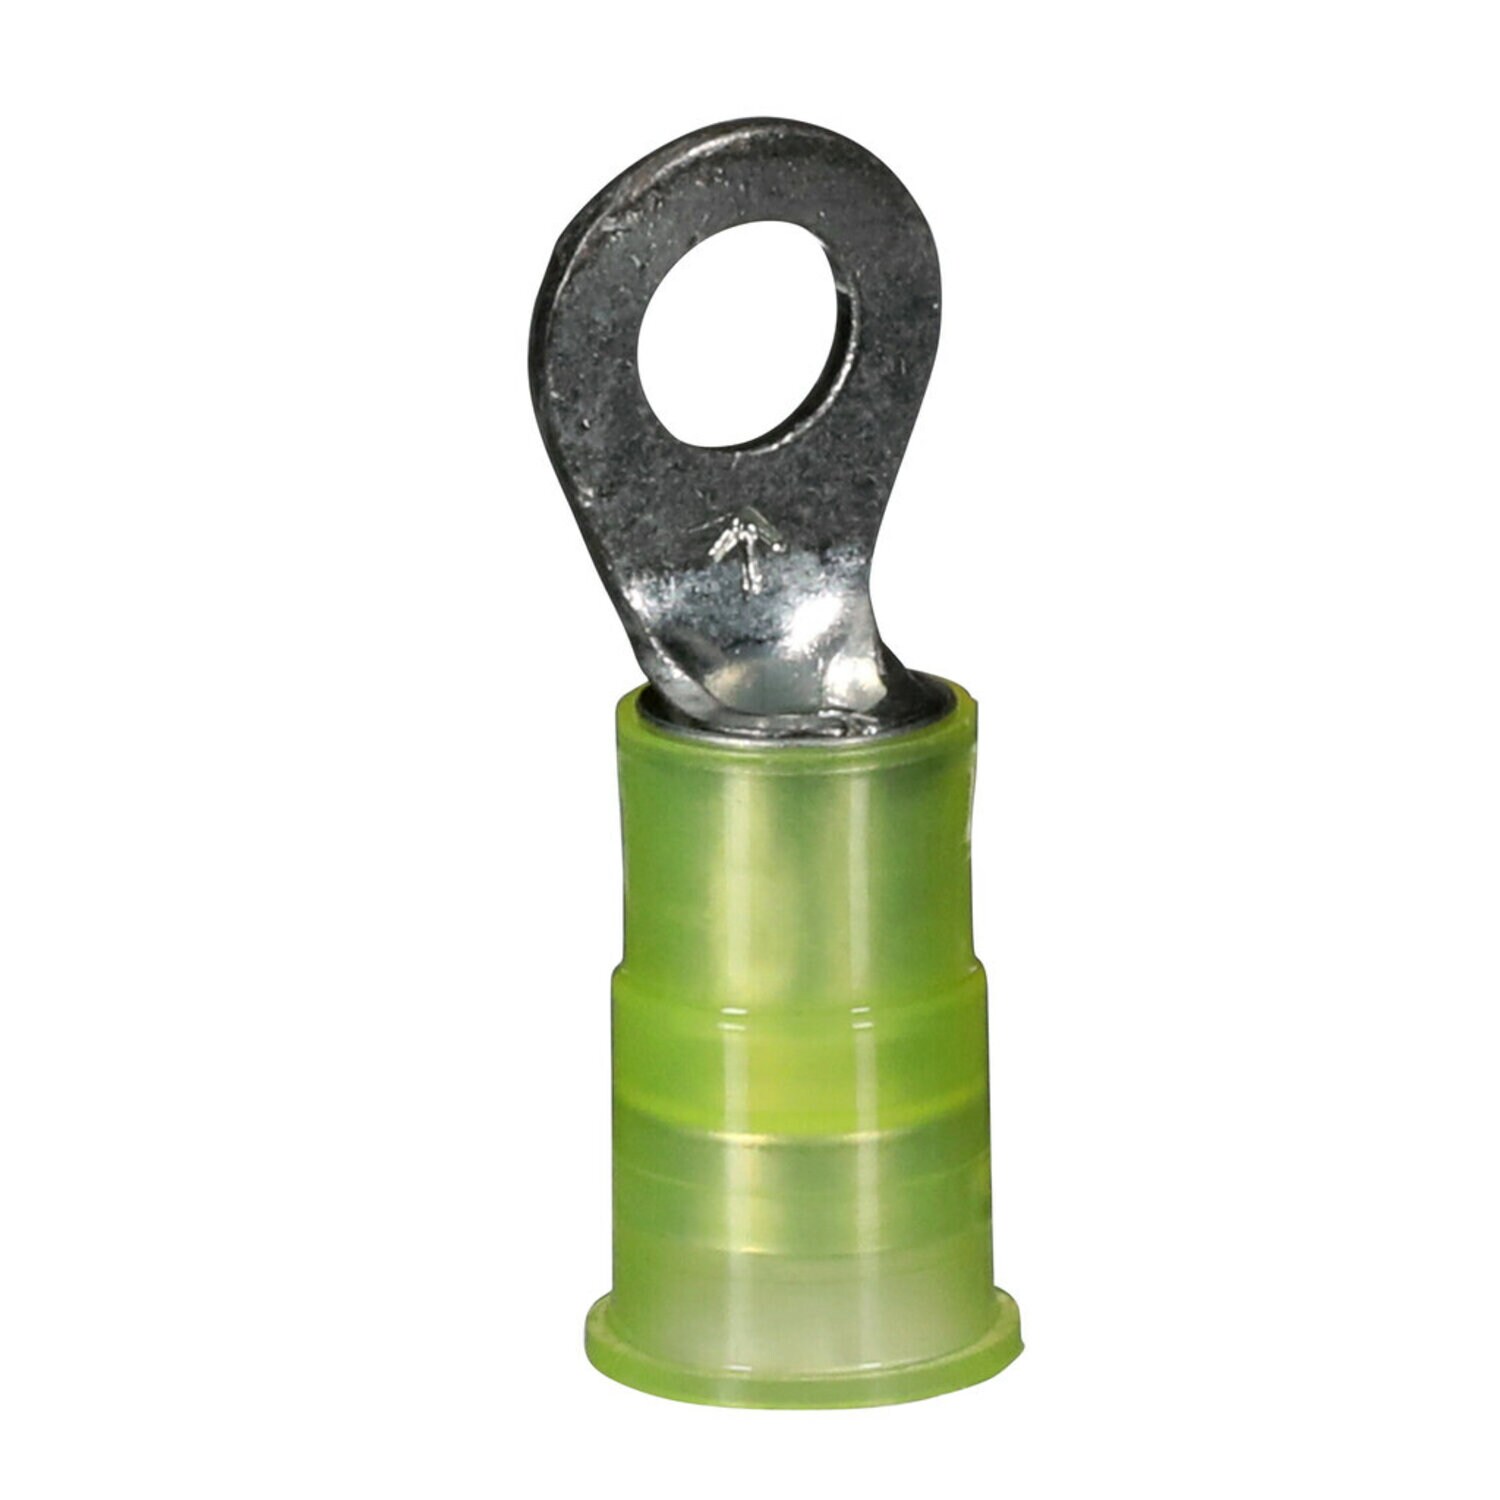 7000133297 - 3M Scotchlok Ring Nylon Insulated, 50/bottle, MNG10-10RX,
standard-style ring tongue fits around the stud, 500/Case